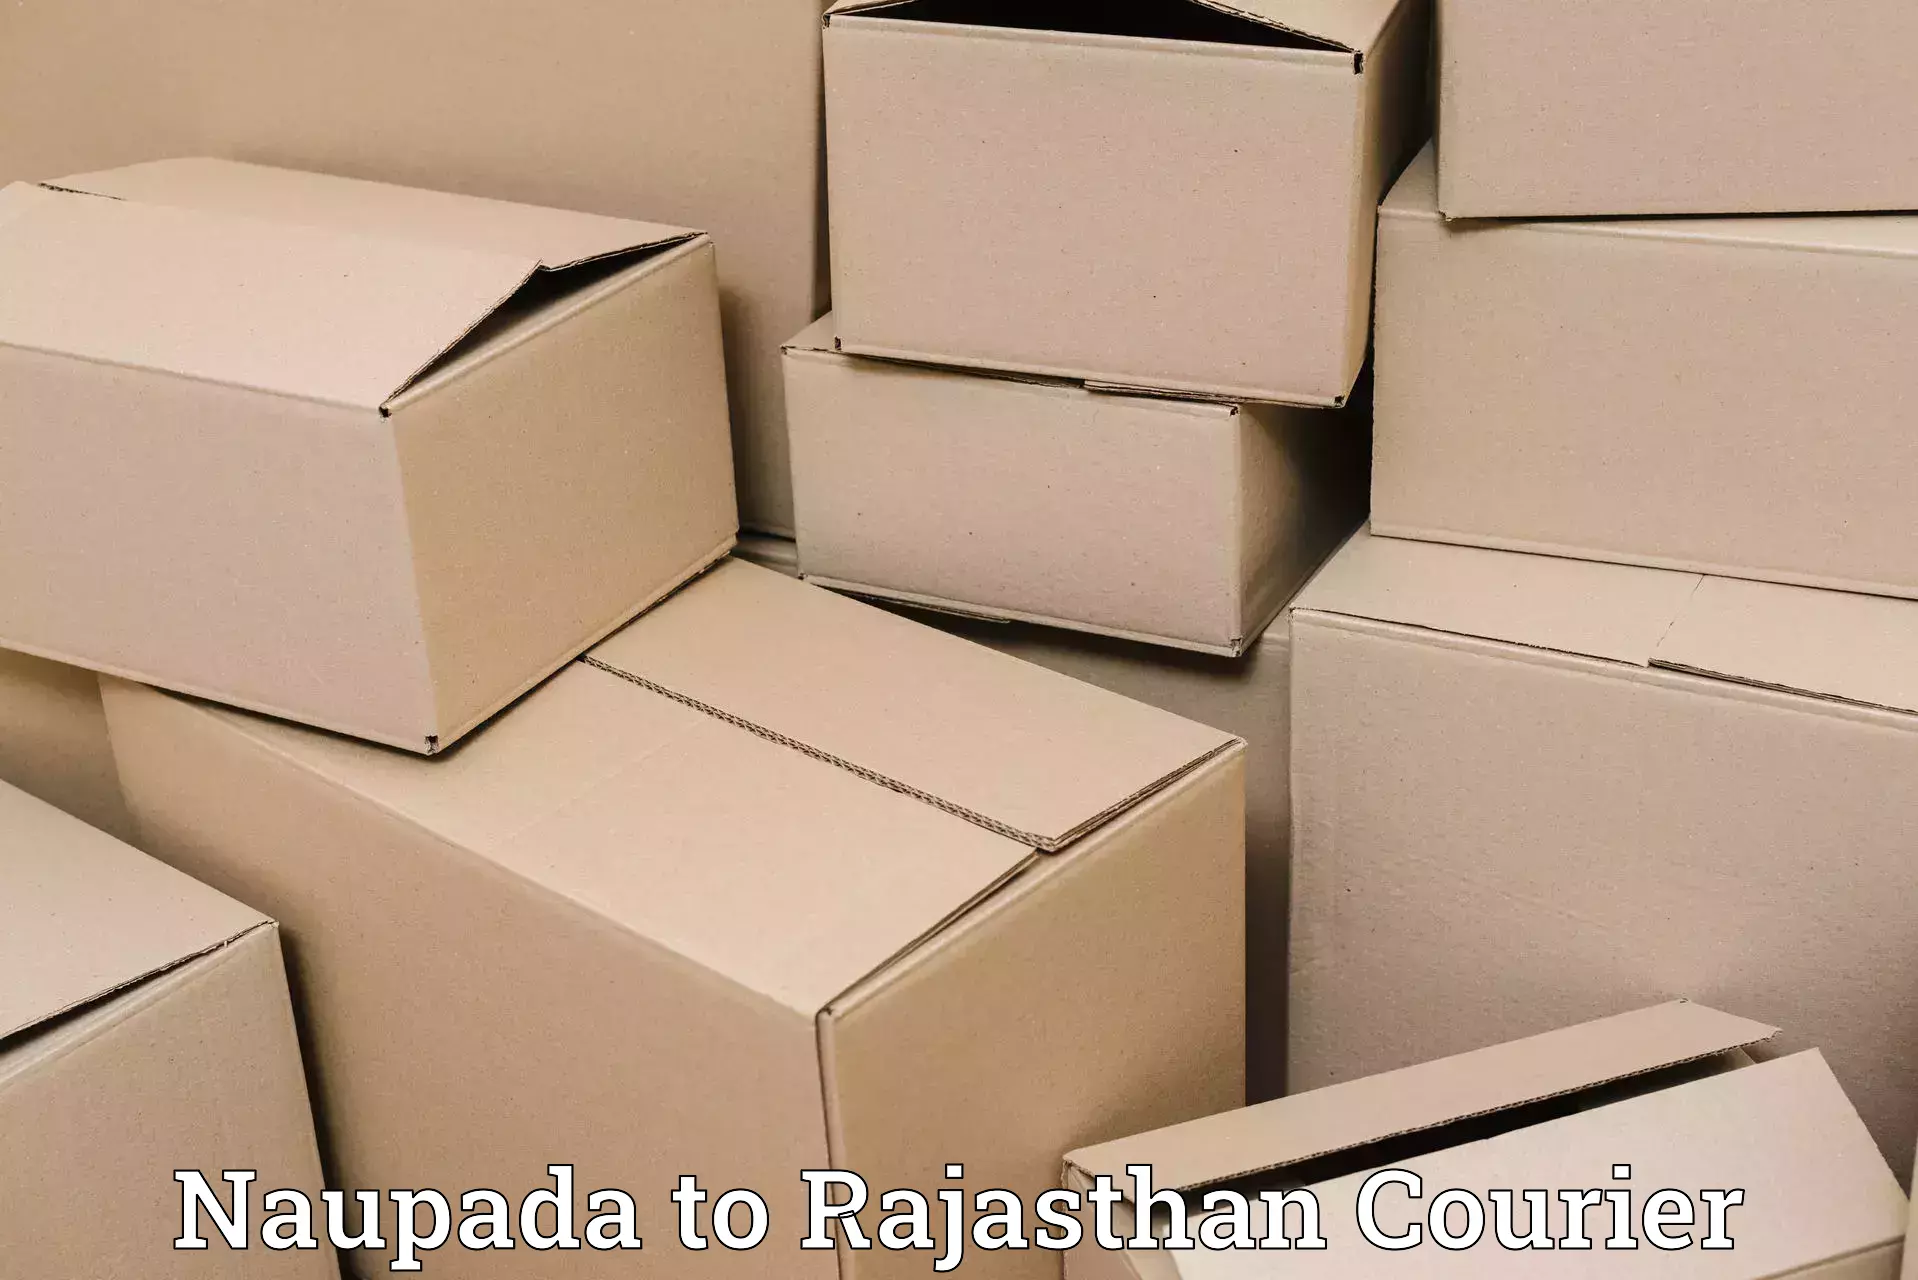 Express delivery network Naupada to Rajasthan